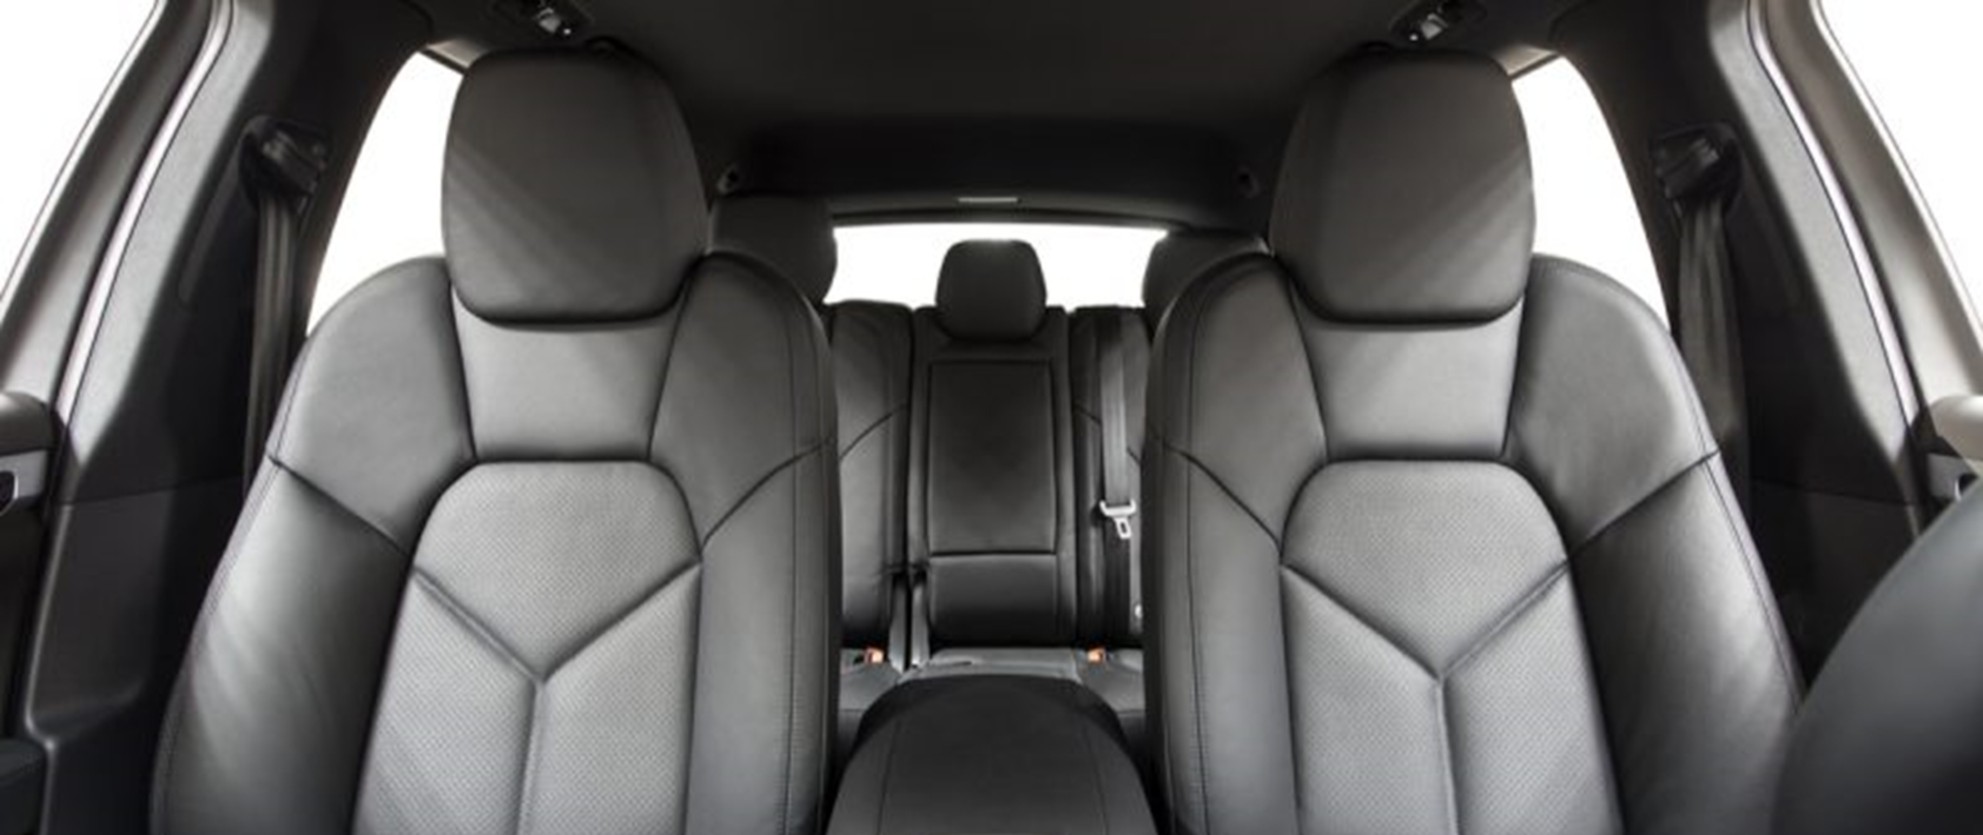 SEATS AND ACCESSORIES FOR VEHICLES